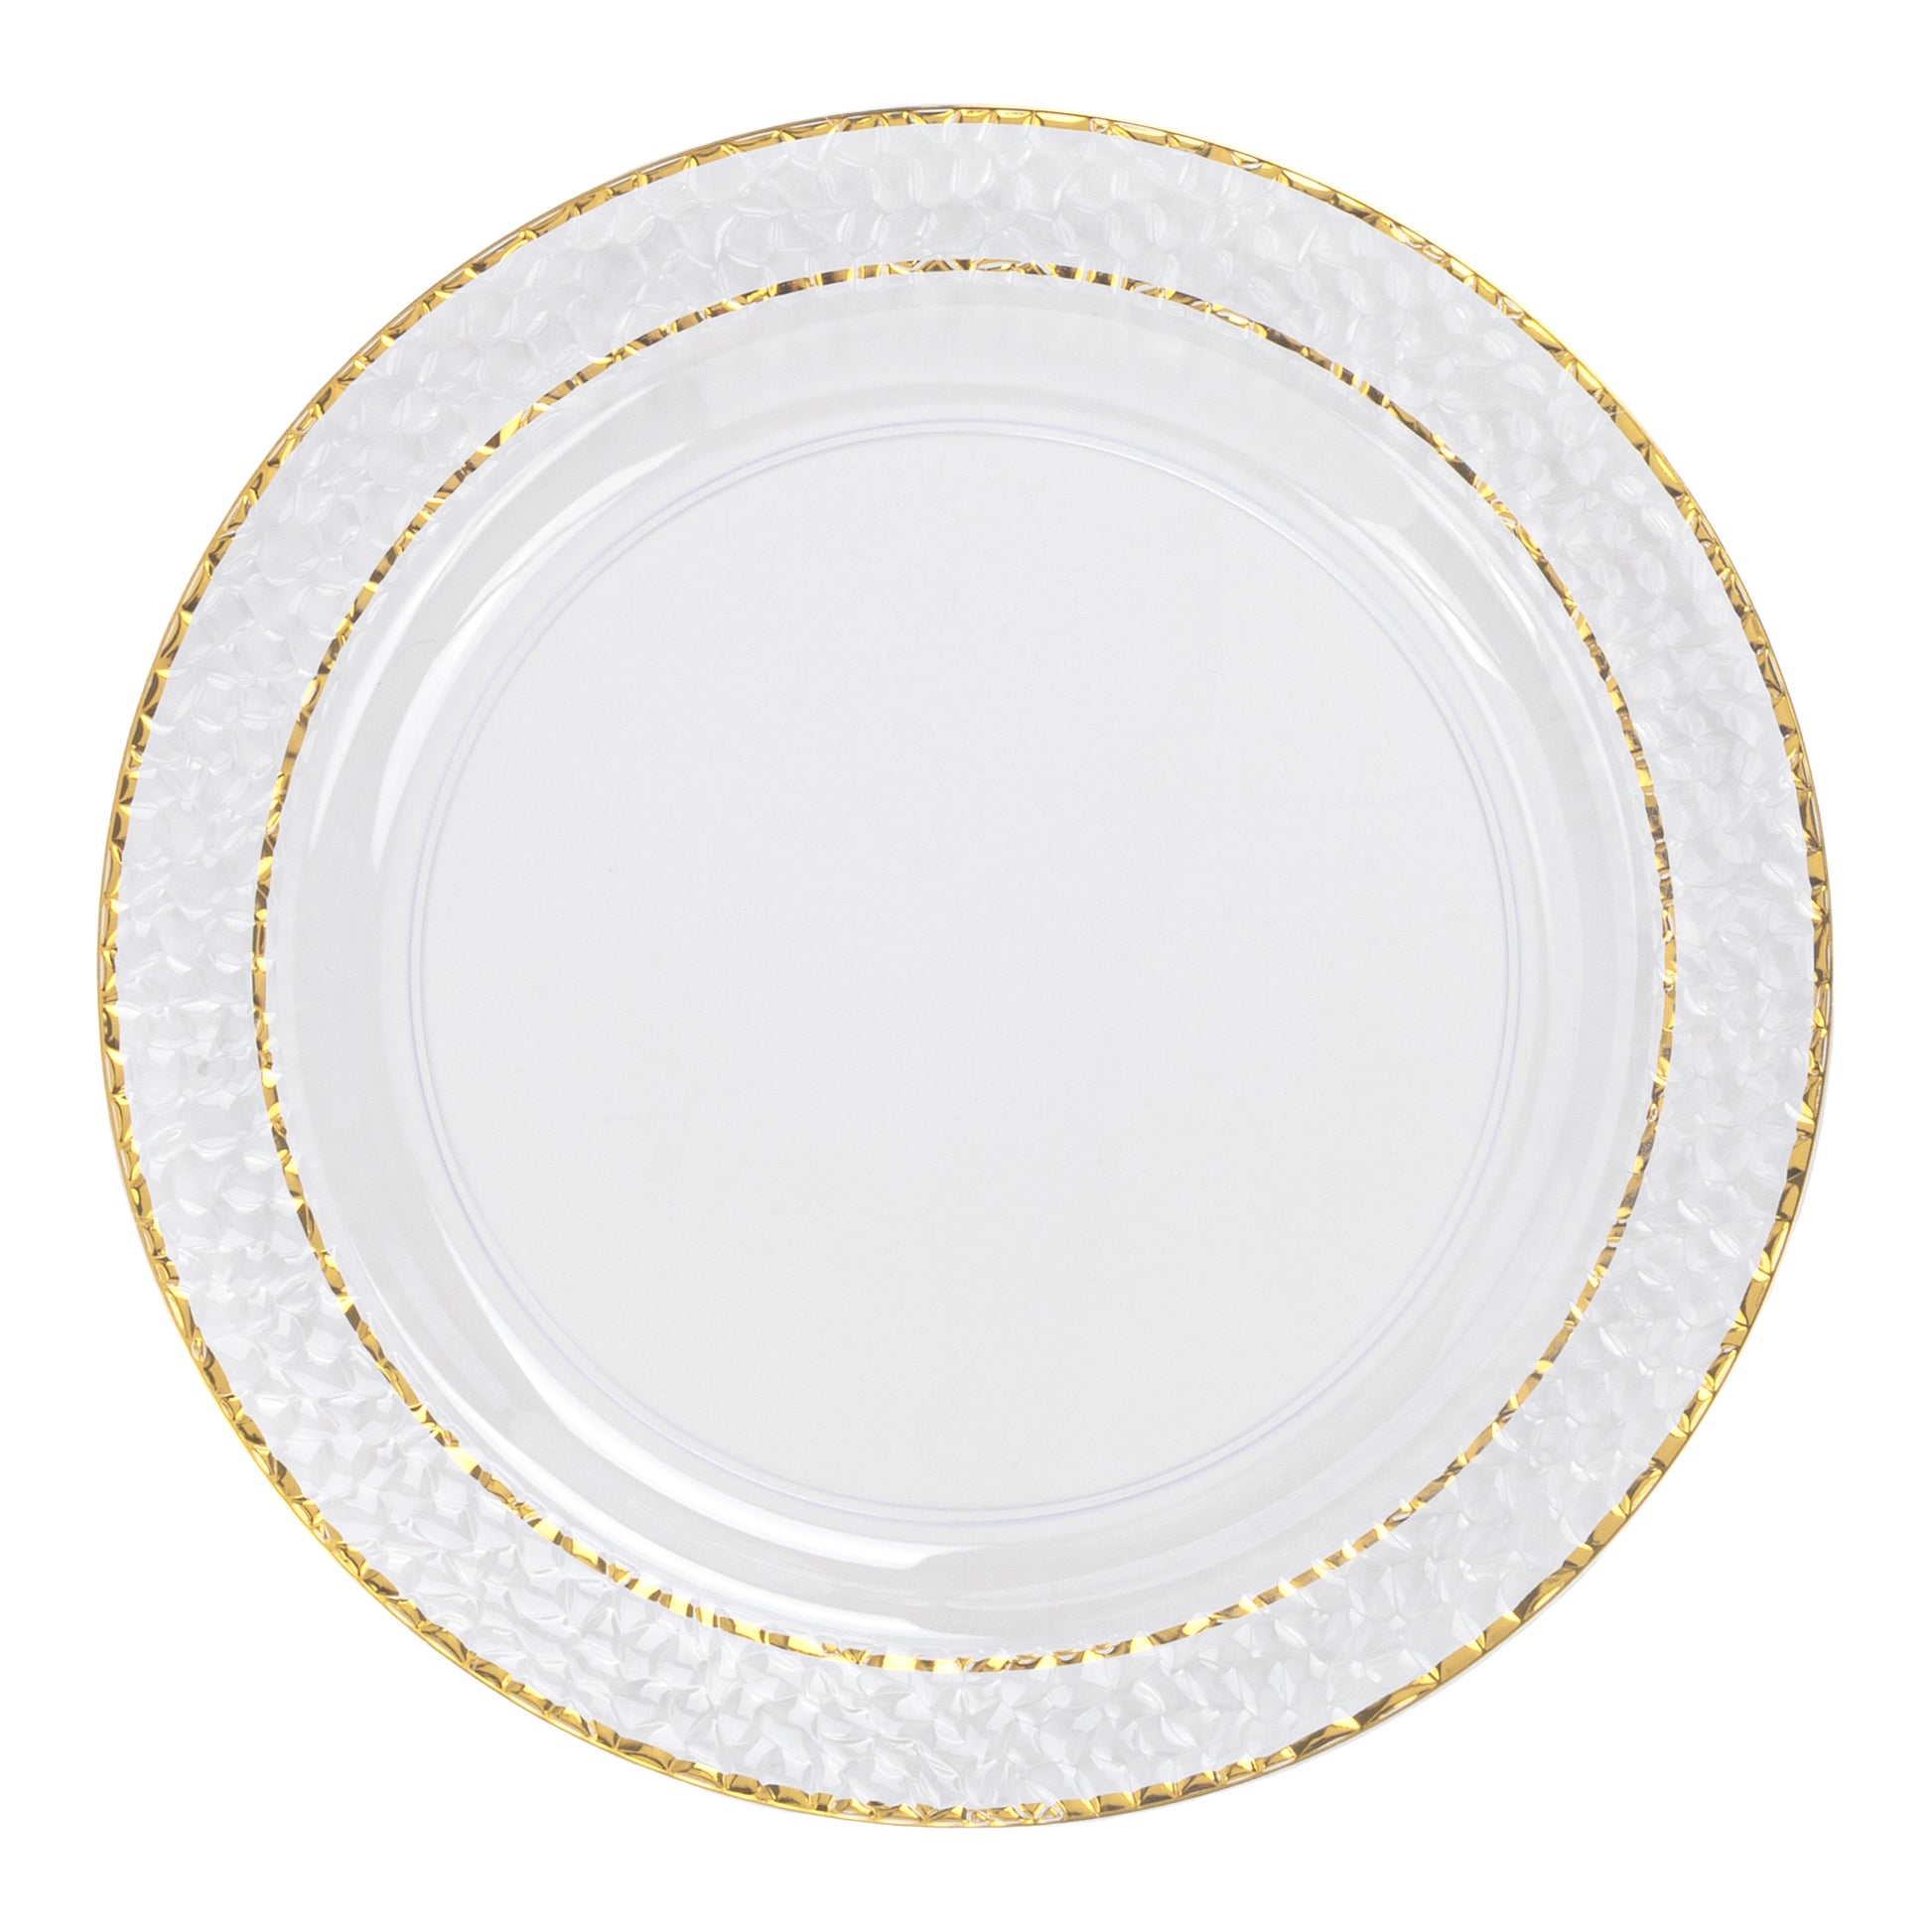 Hammered Disposable Plastic Plates 40 pcs Combo Pack - Clear Gold-Trimmed